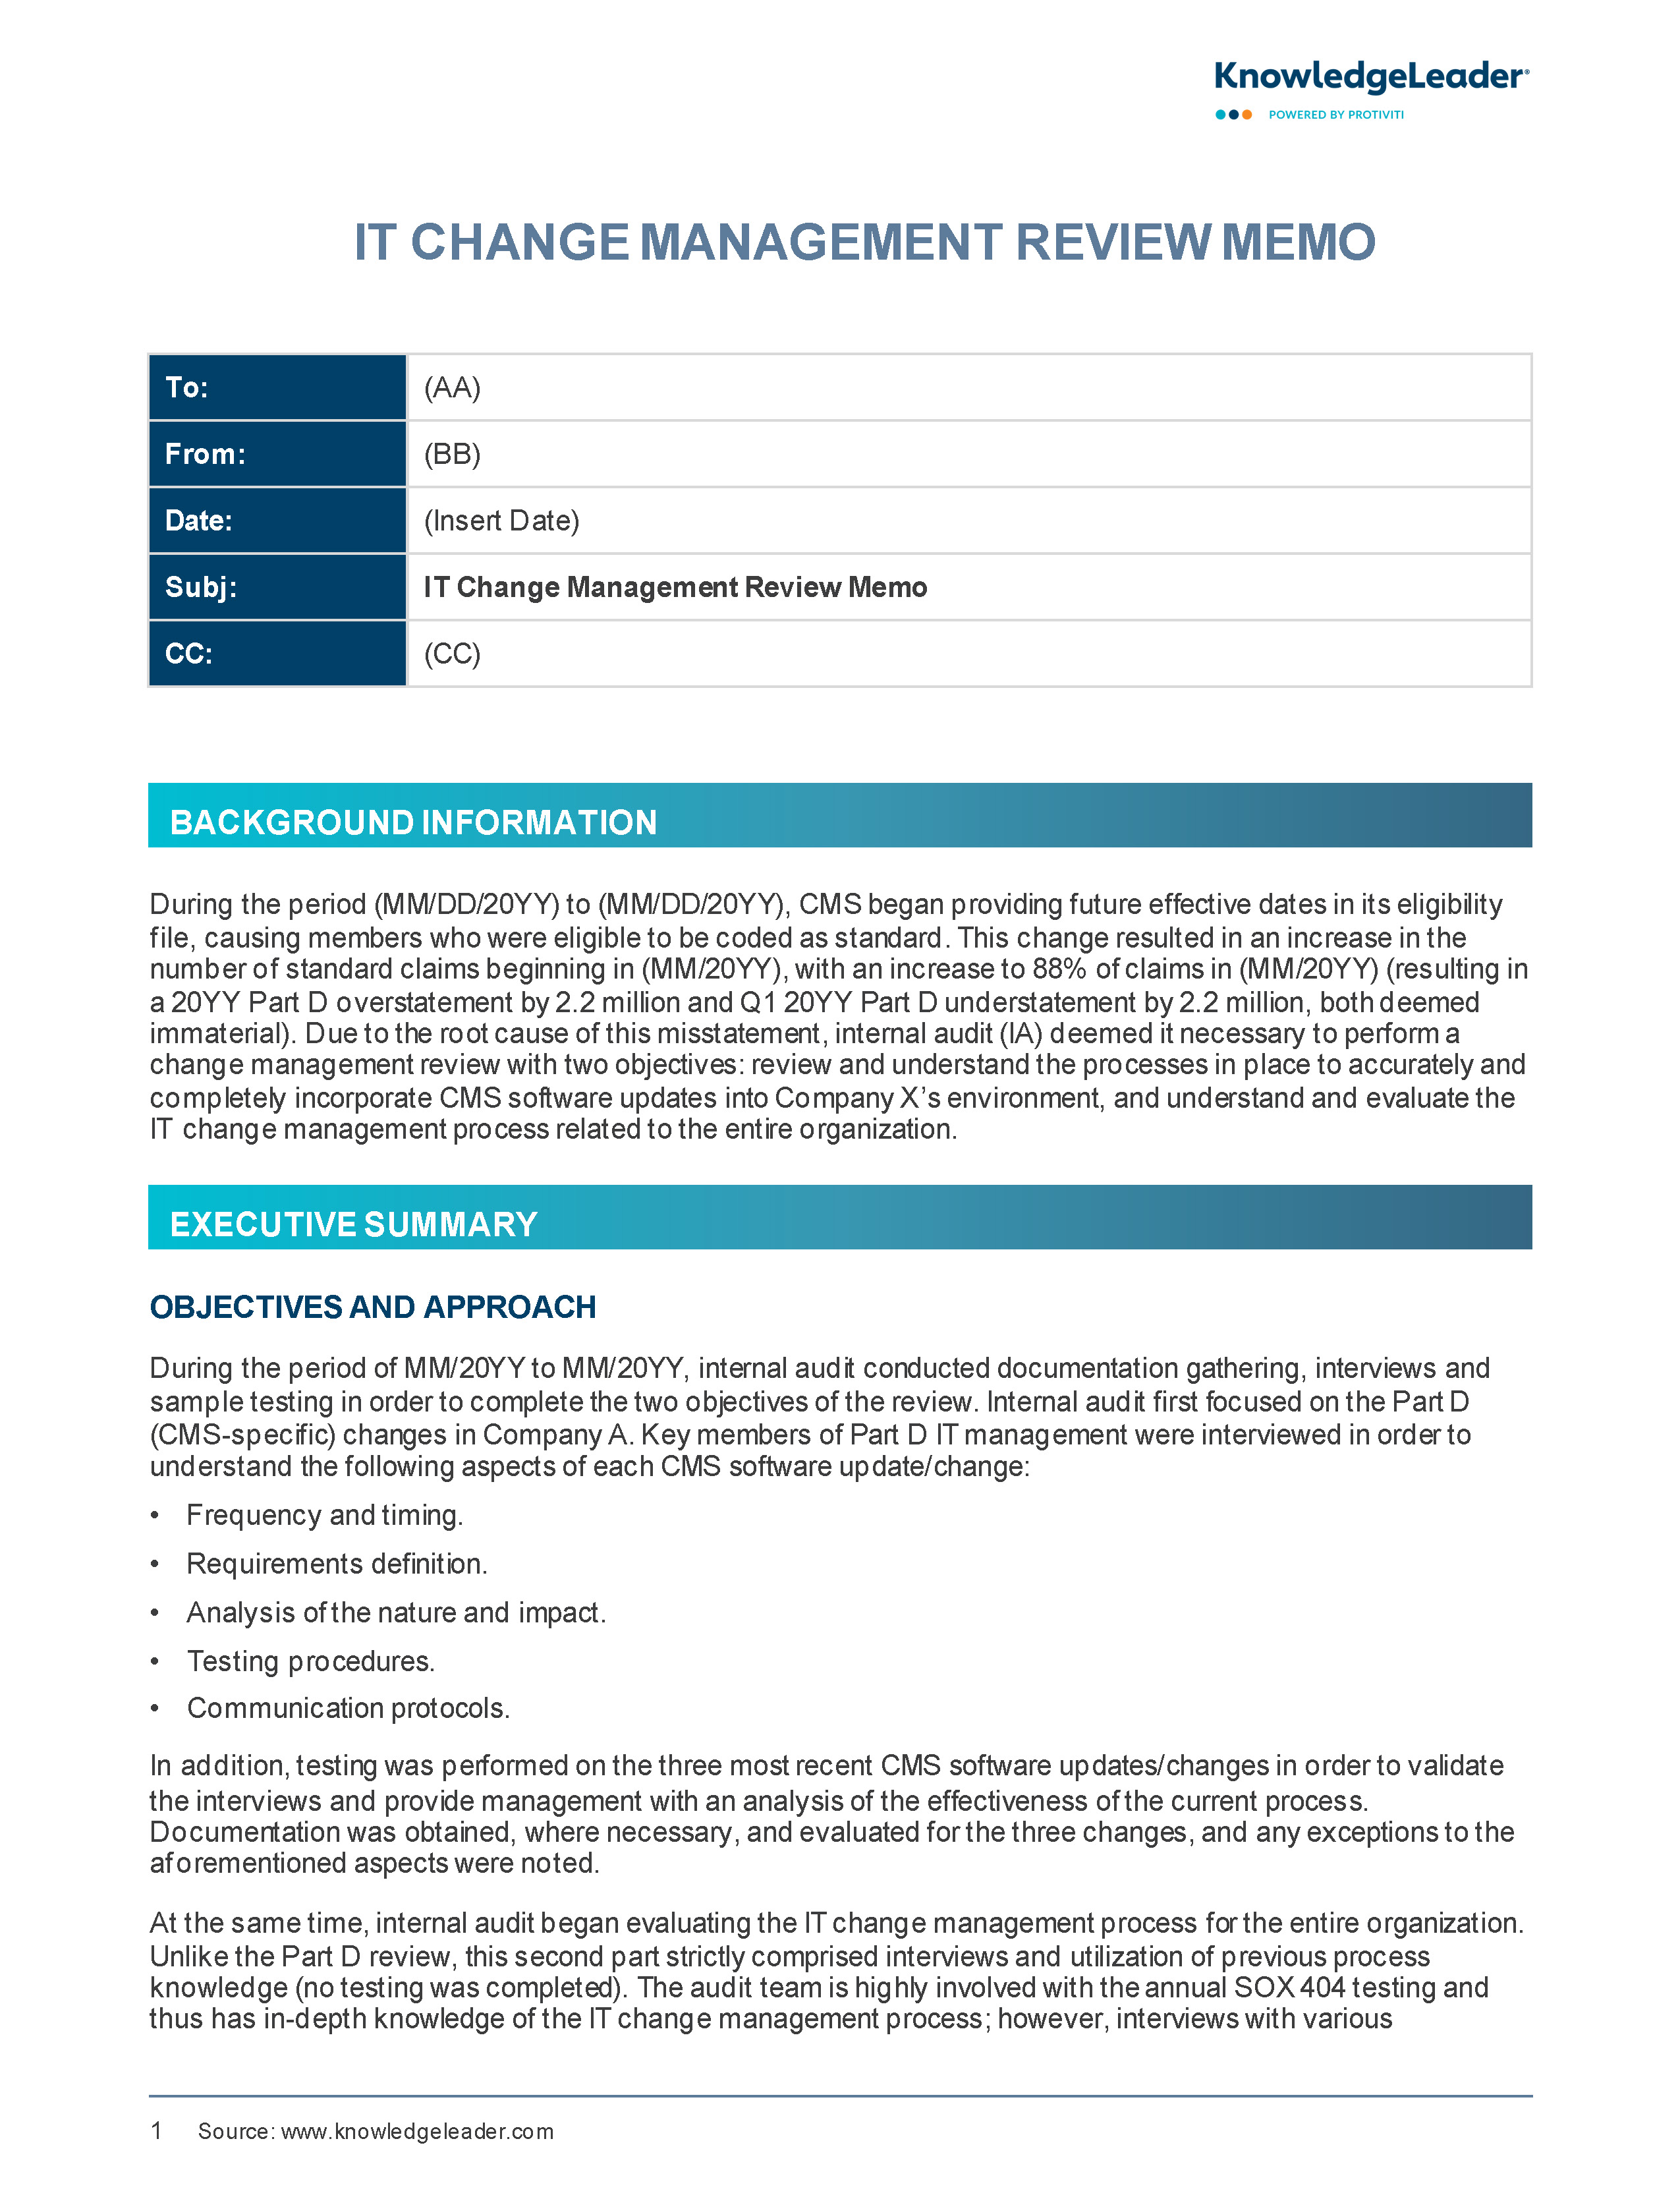 Screenshot of the first page of IT Change Management Review Memo